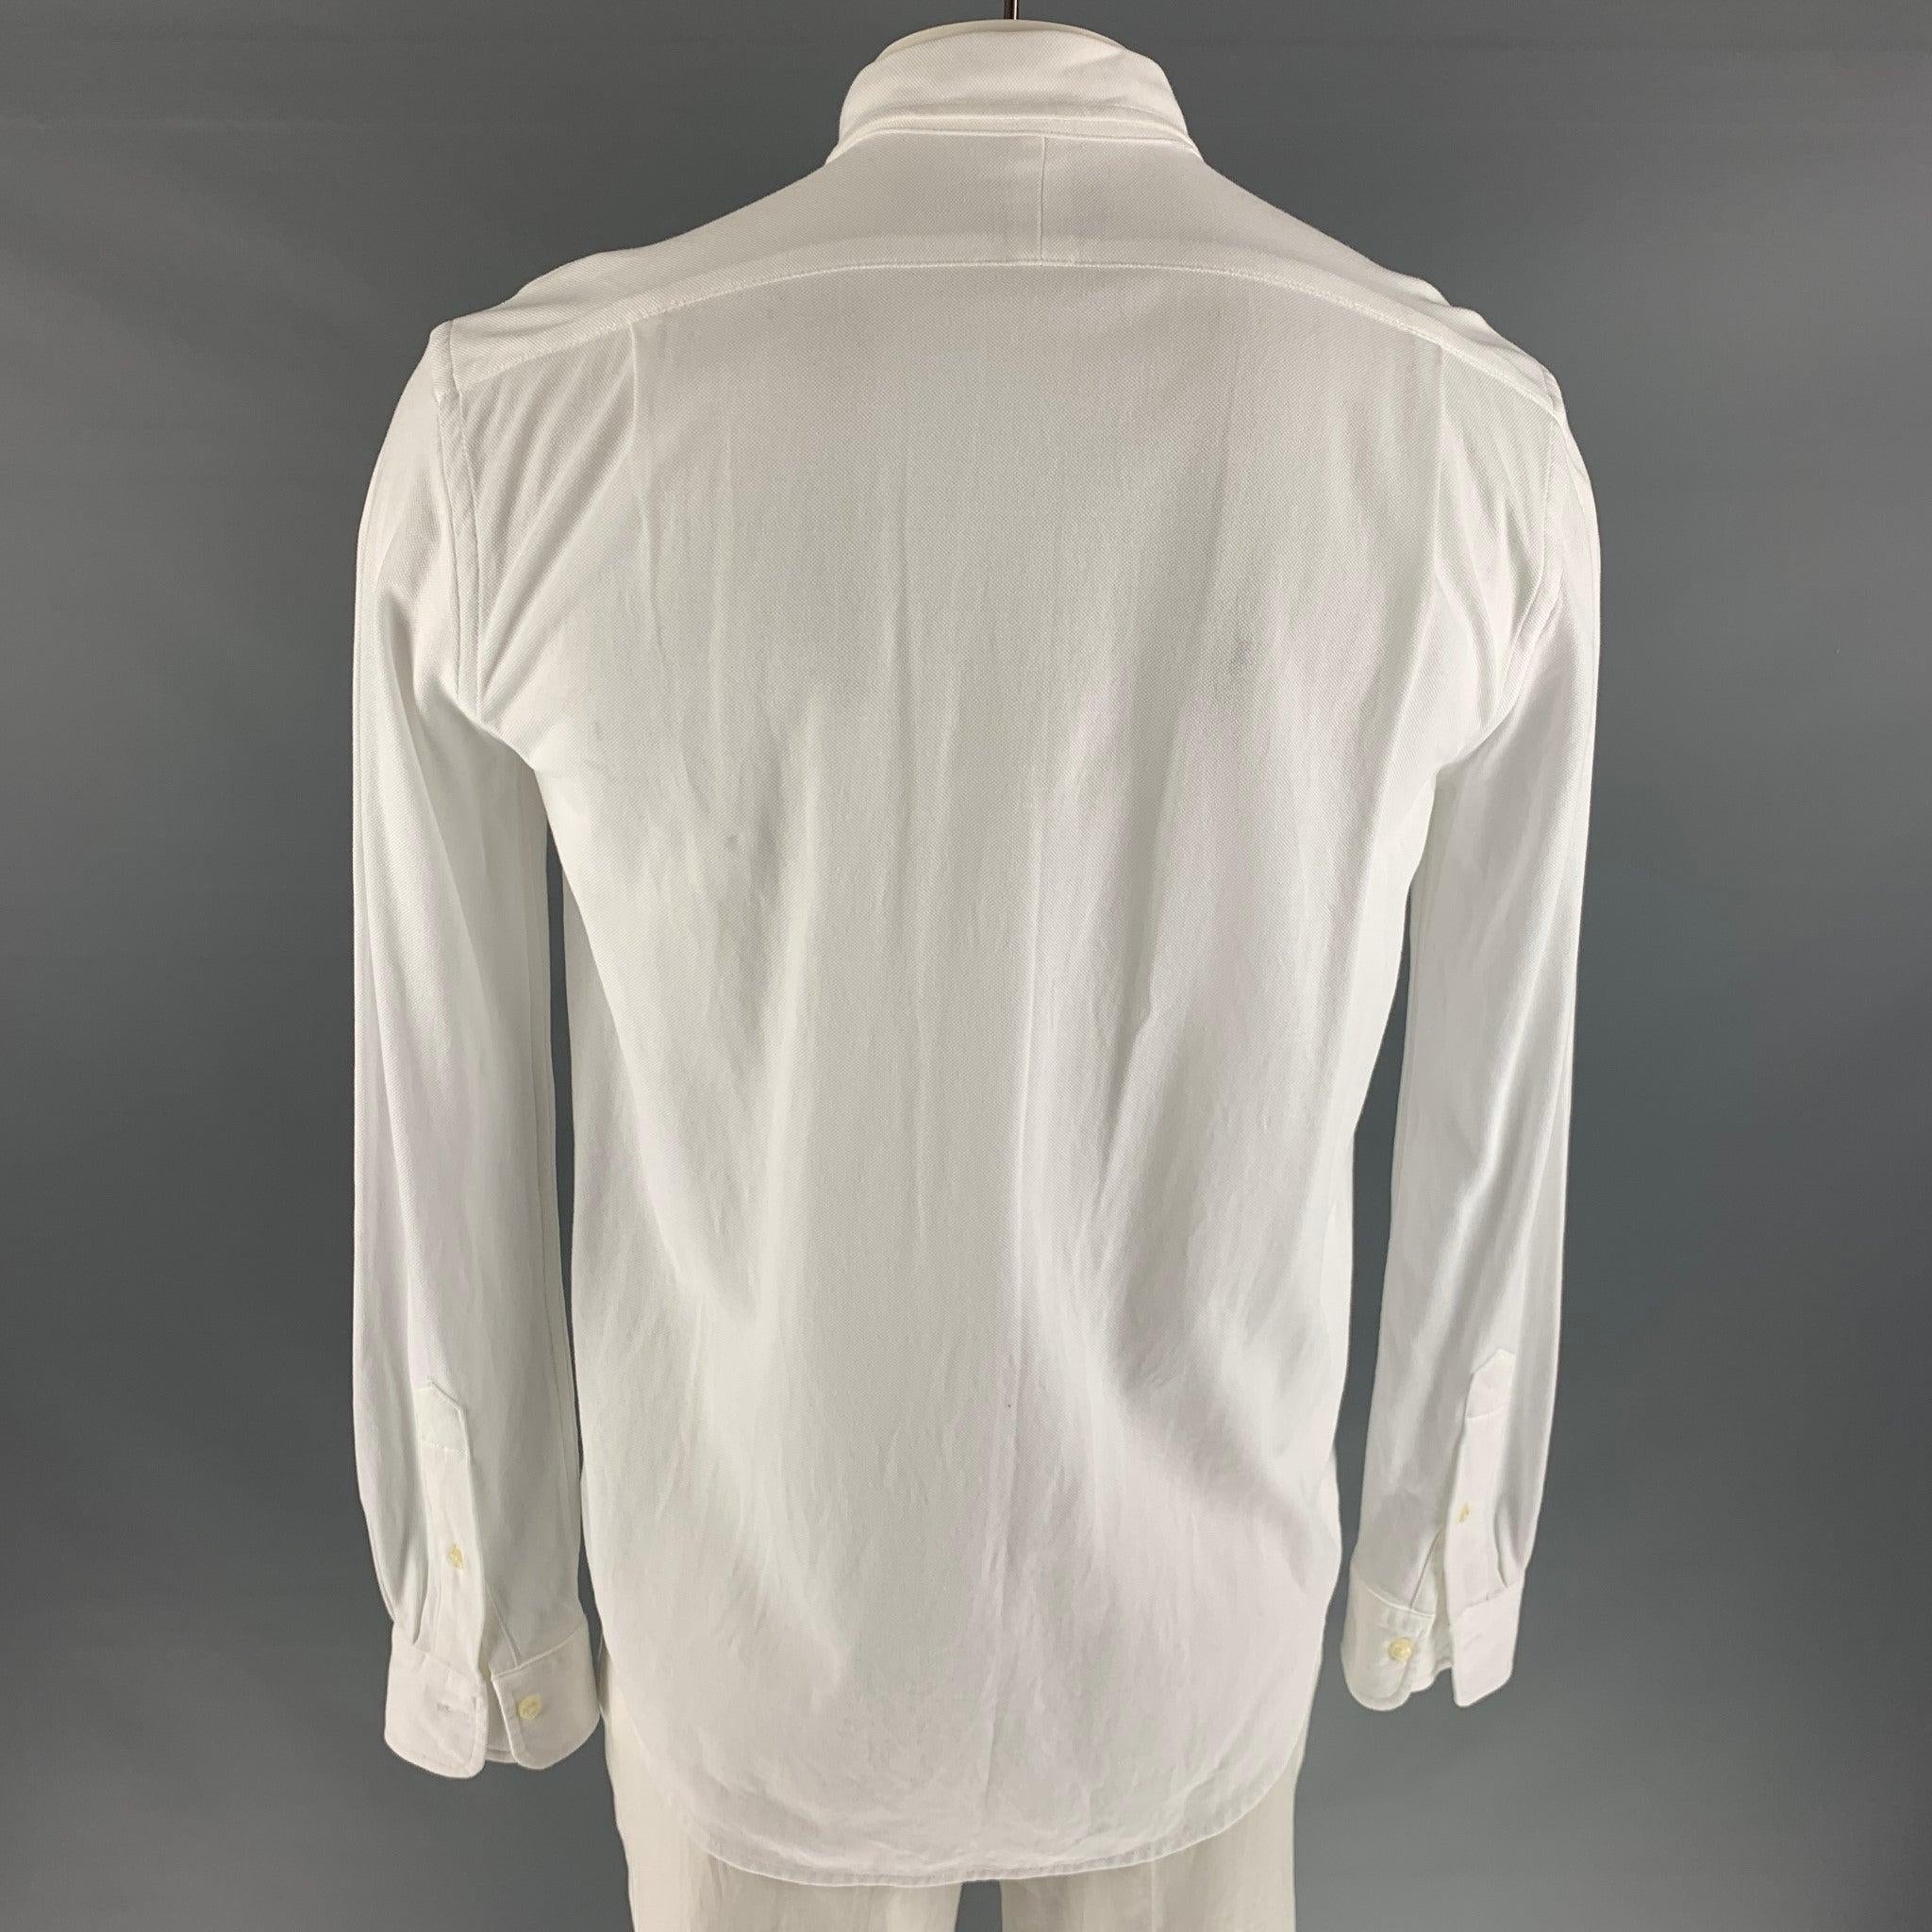 RALPH LAUREN Size L White Solid Cotton Button Up Long Sleeve Shirt In Good Condition For Sale In San Francisco, CA